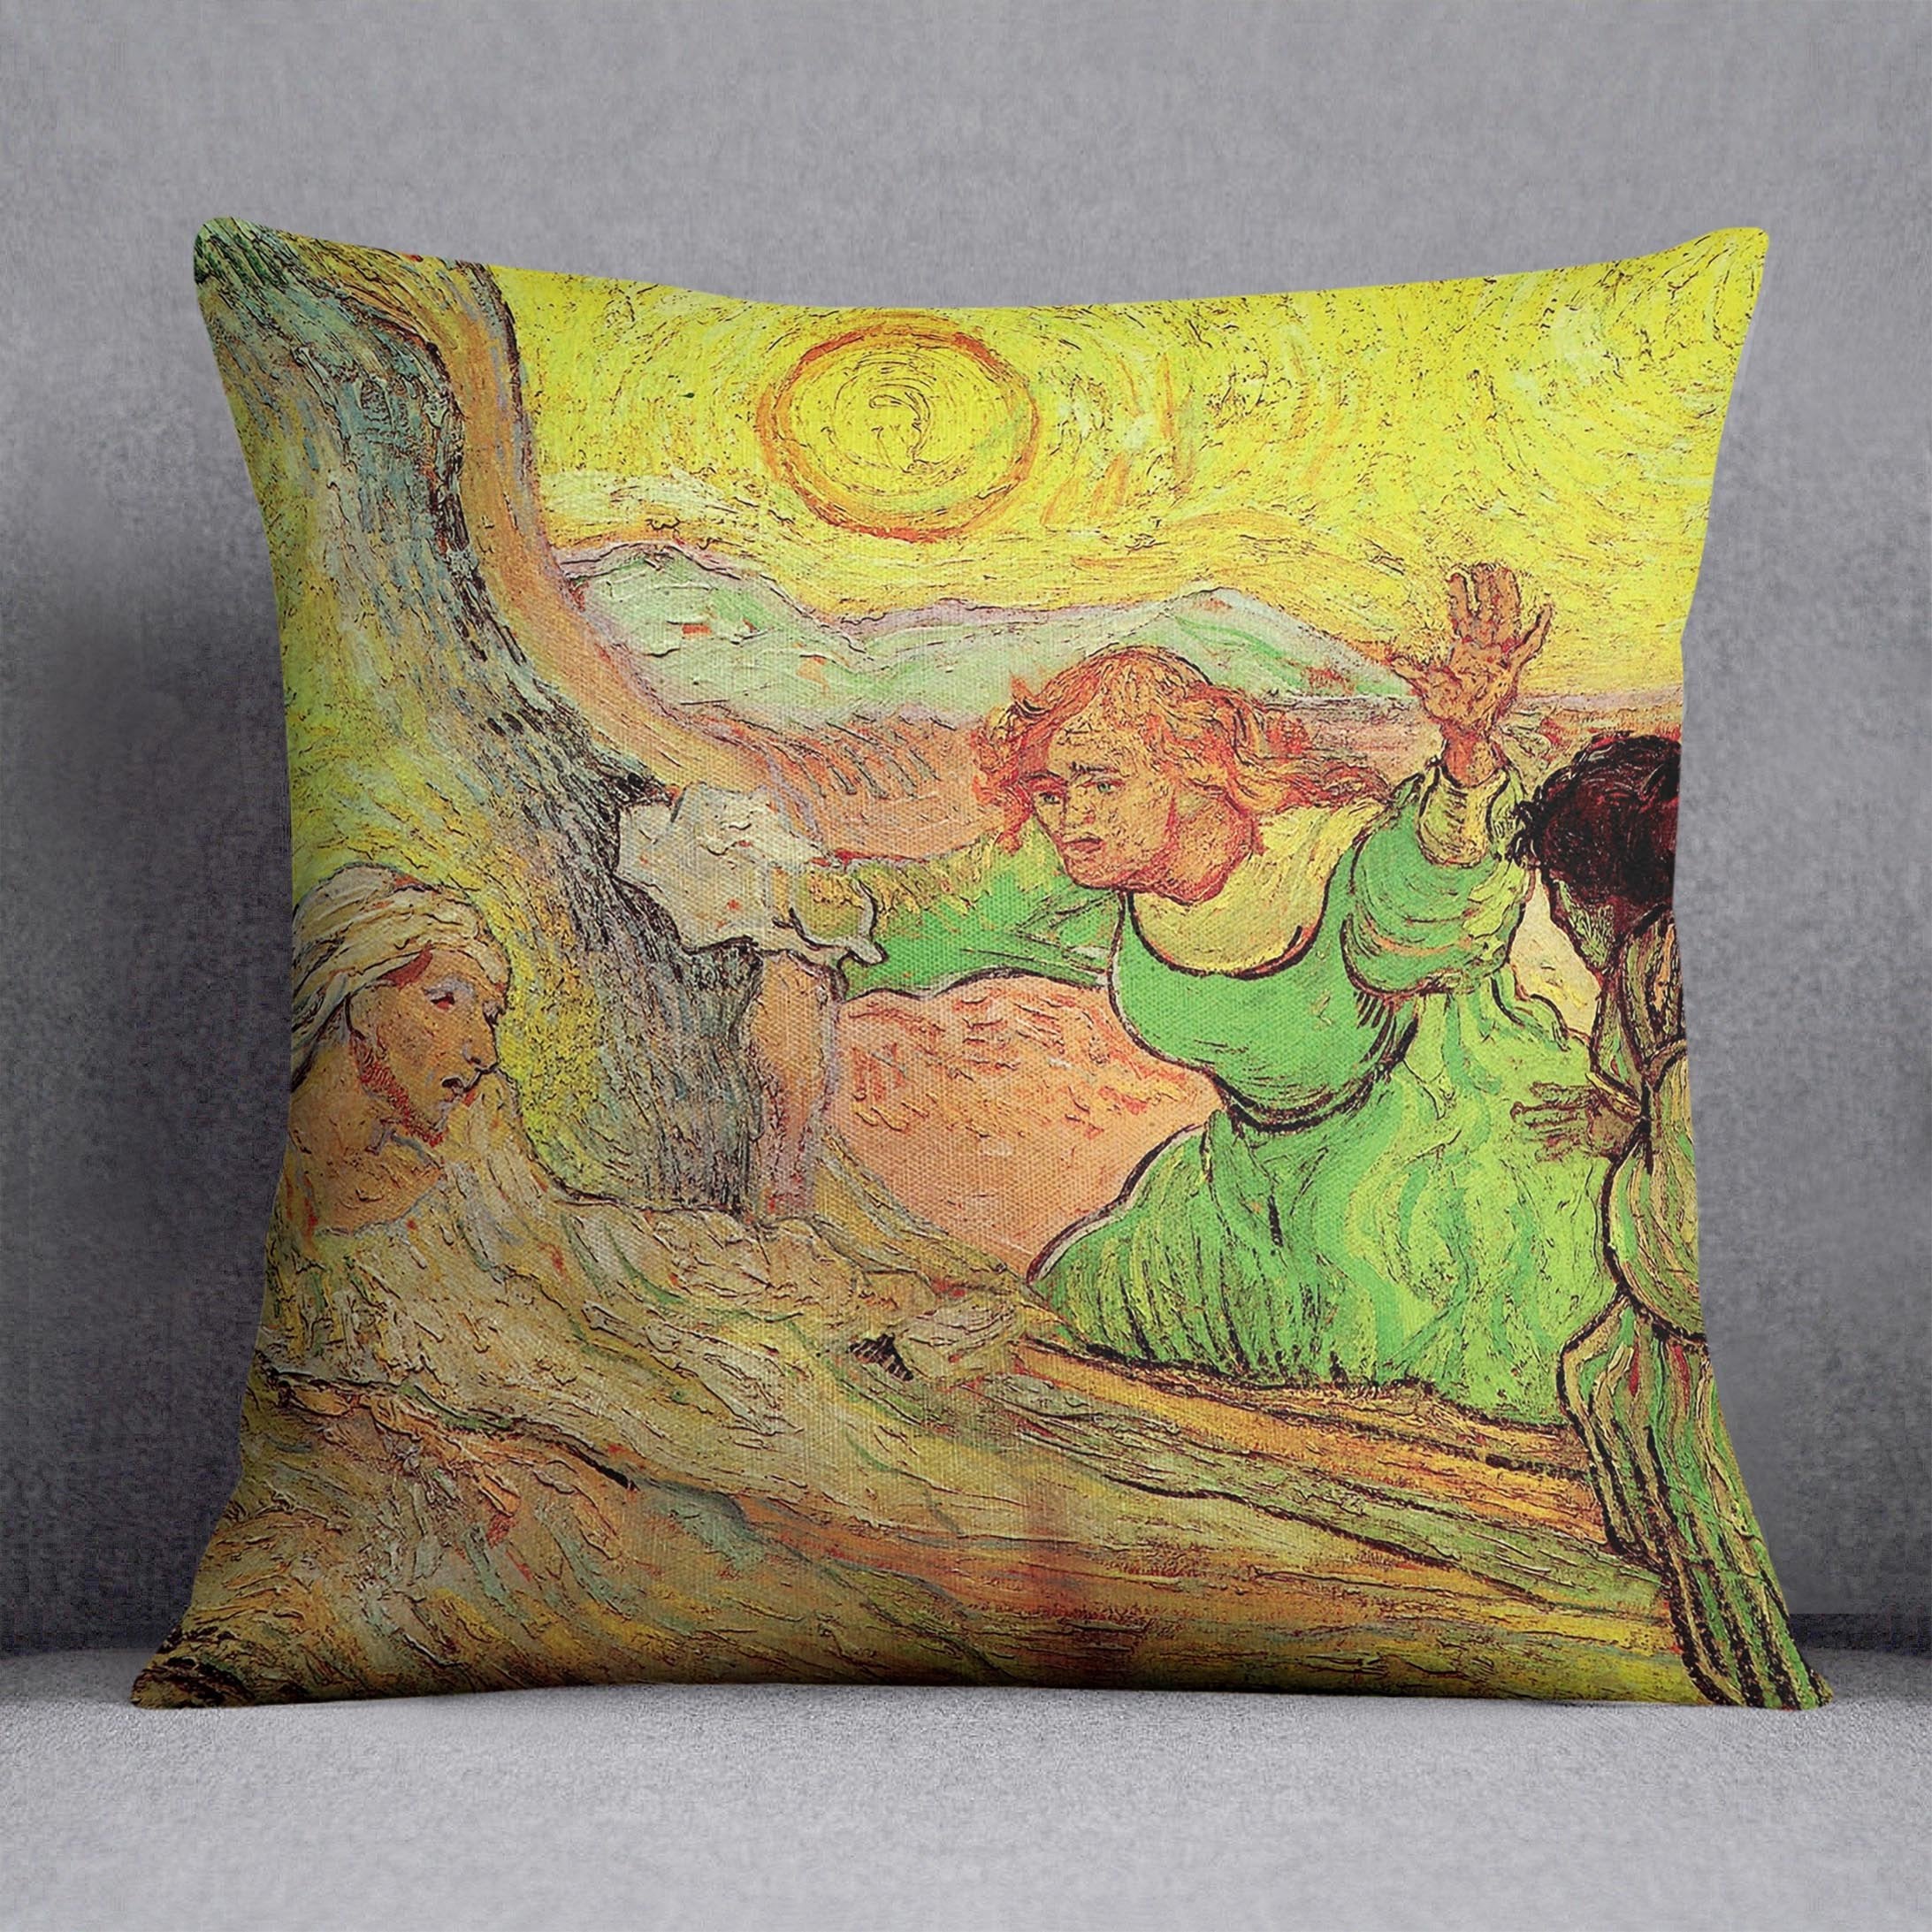 The Raising of Lazarus after Rembrandt by Van Gogh Throw Pillow